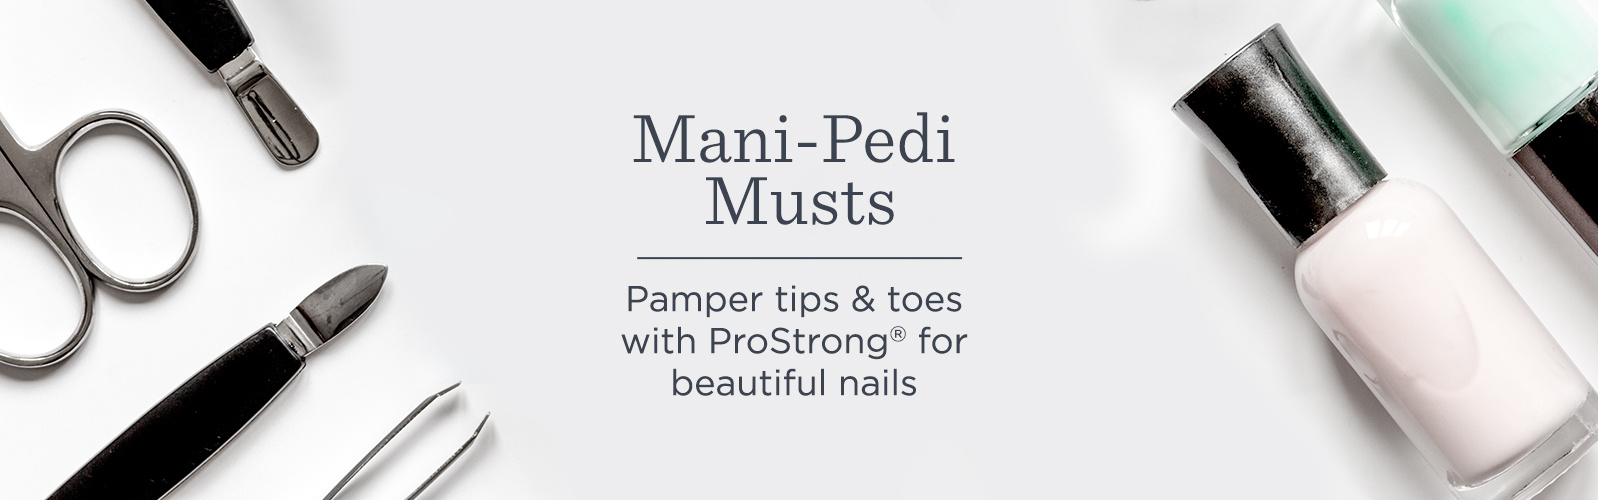 Mani-Pedi Musts. Pamper tips & toes with ProStrong® for beautiful nails